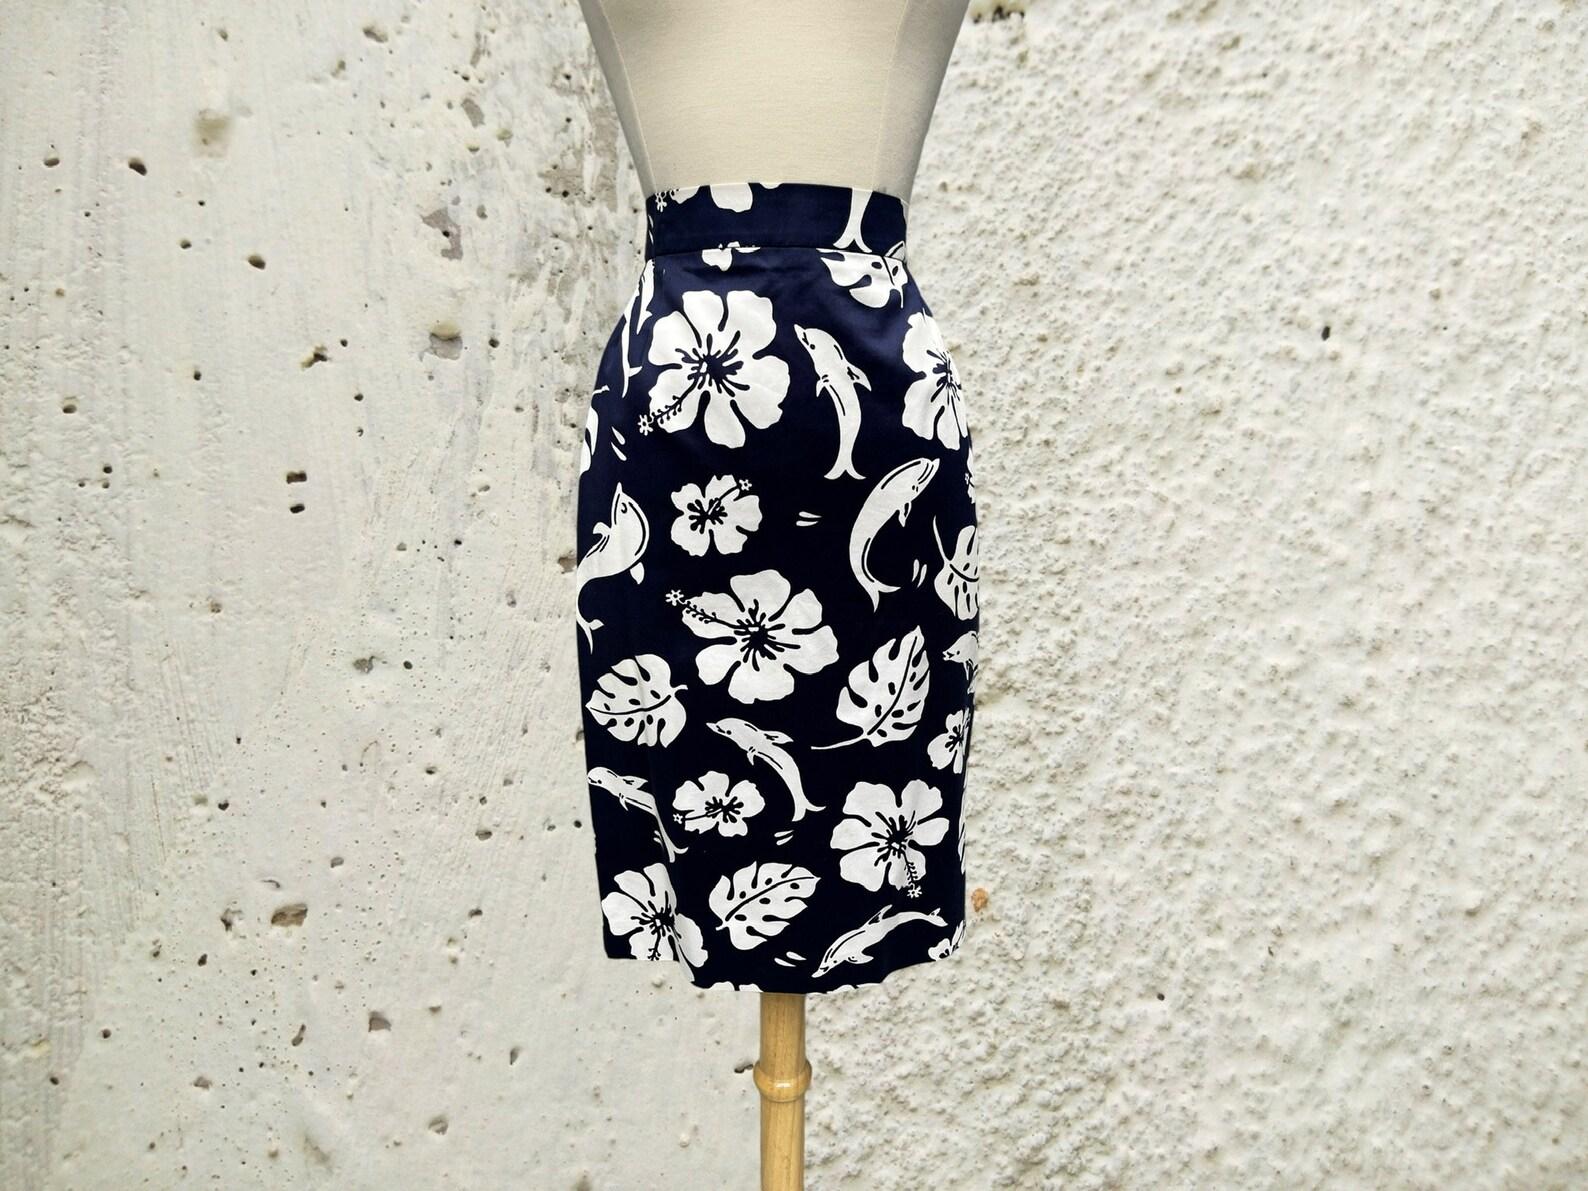 Escada blue cotton sateen high waist pencil skirt. Fitted silhouette. Back zip closure. The skirt is lined.

✩ Tropical print...dolphins, flowers & banana leaves!

Circa 1994
Escada Margaretha Ley
Made in Germany
100% Cotton
Tagged Size 34 (refer to